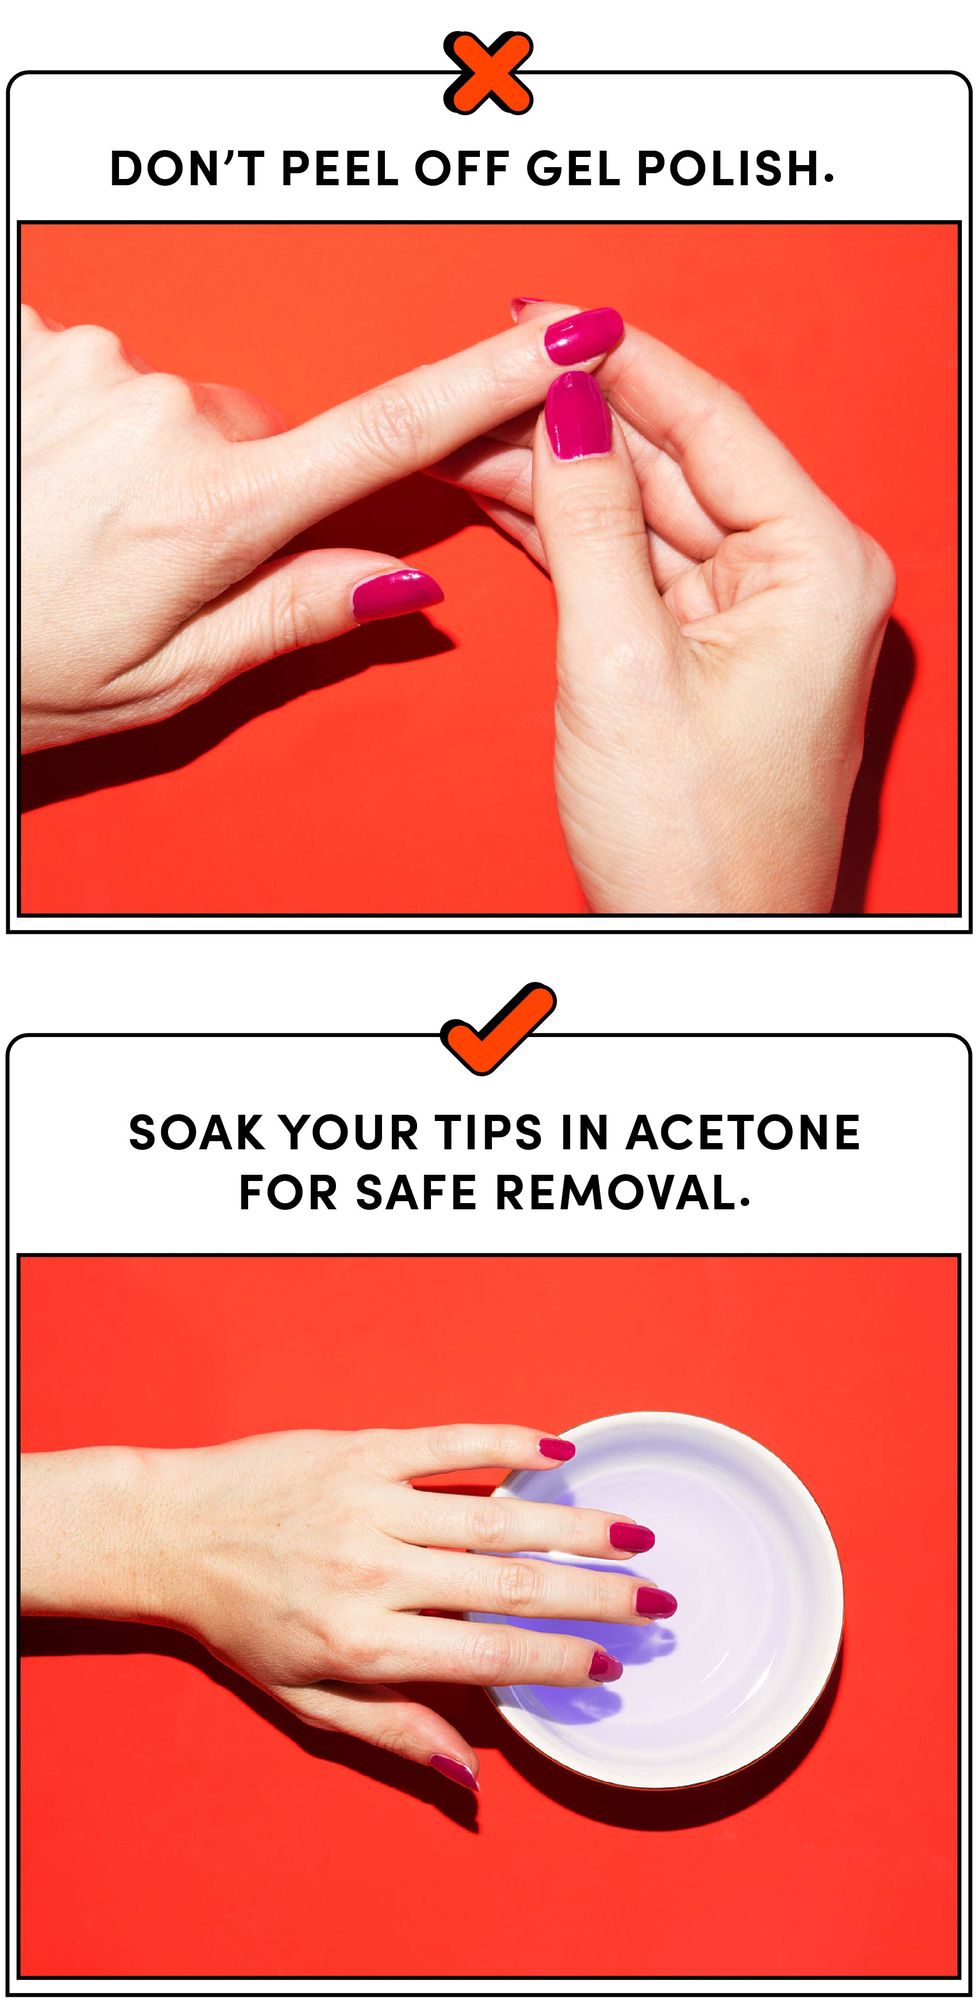 12 Nail Care Tips You Need to See - How To Care For Your Nails